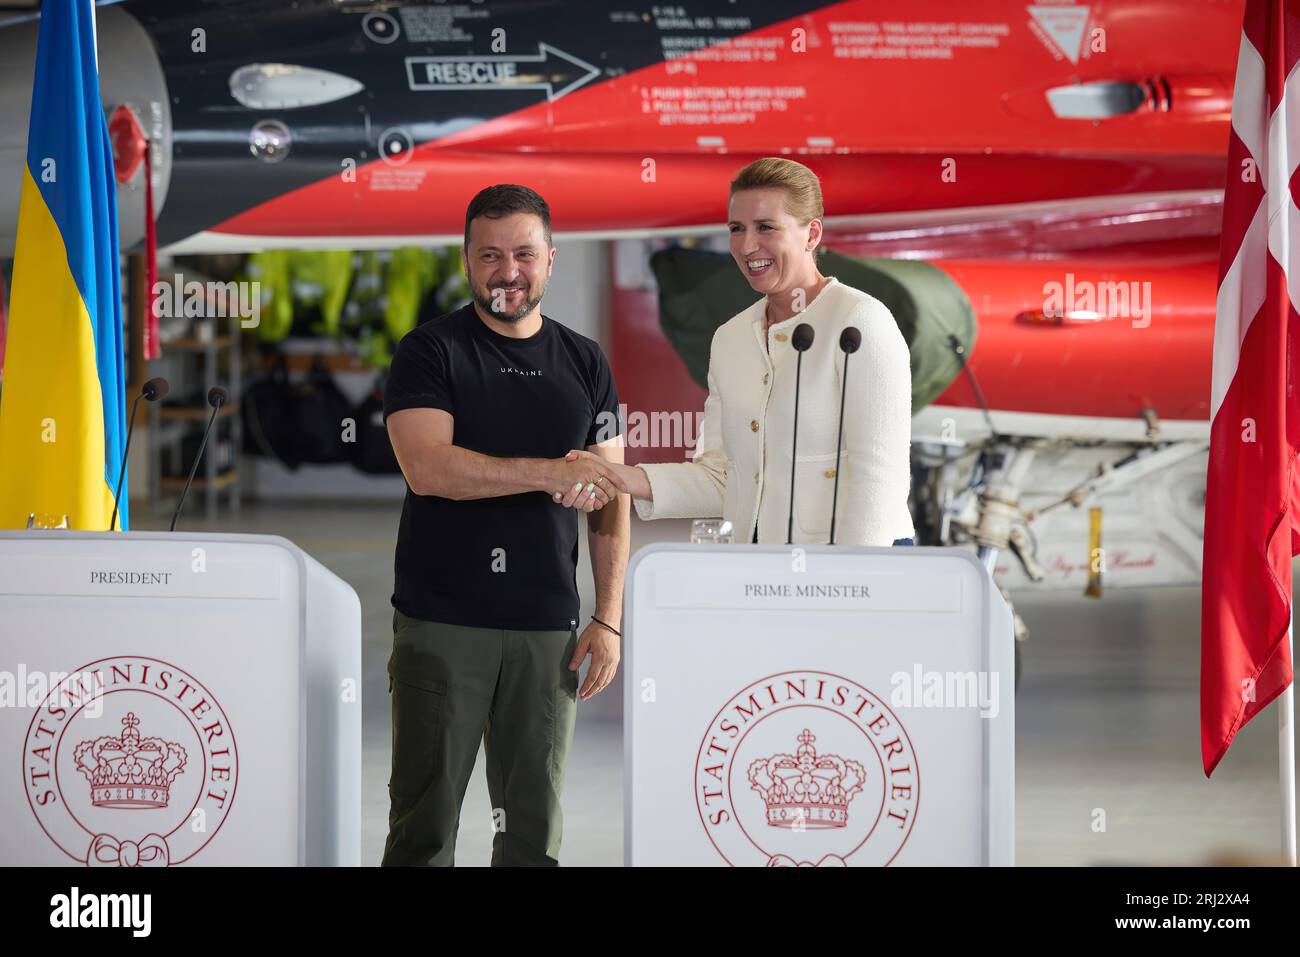 PM Mette Frederiksen in F-16. During a working visit to the Kingdom of Denmark, the President of Ukraine, Volodymyr Zelensky ,visited the Fighter Wing Skrydstrup air base of the Royal Danish Air Force.   During a working visit to the Kingdom of Denmark, the President of Ukraine, Volodymyr Zelensky ,visited the Fighter Wing Skrydstrup air base of the Royal Danish Air Force.   Accompanied by Prime Minister of Denmark Mette Frederiksen and the Royal Air Force Command, the Head of State familiarized himself with the technical features of F-16 Fighting Falcon jets and training program for Ukraine. Stock Photo